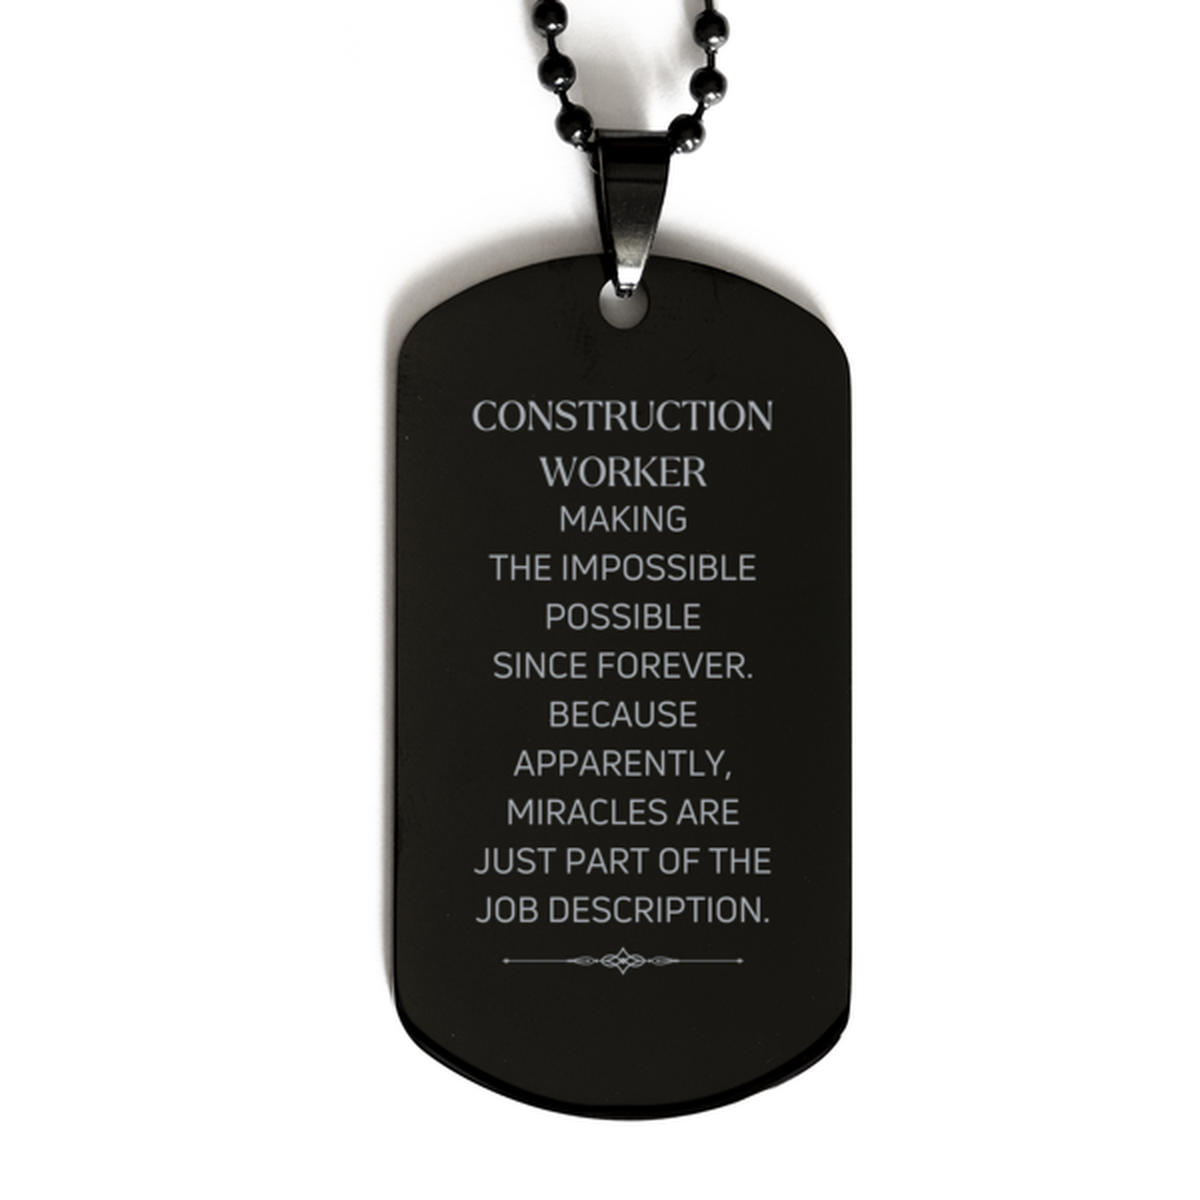 Funny Construction Worker Gifts, Miracles are just part of the job description, Inspirational Birthday Black Dog Tag For Construction Worker, Men, Women, Coworkers, Friends, Boss